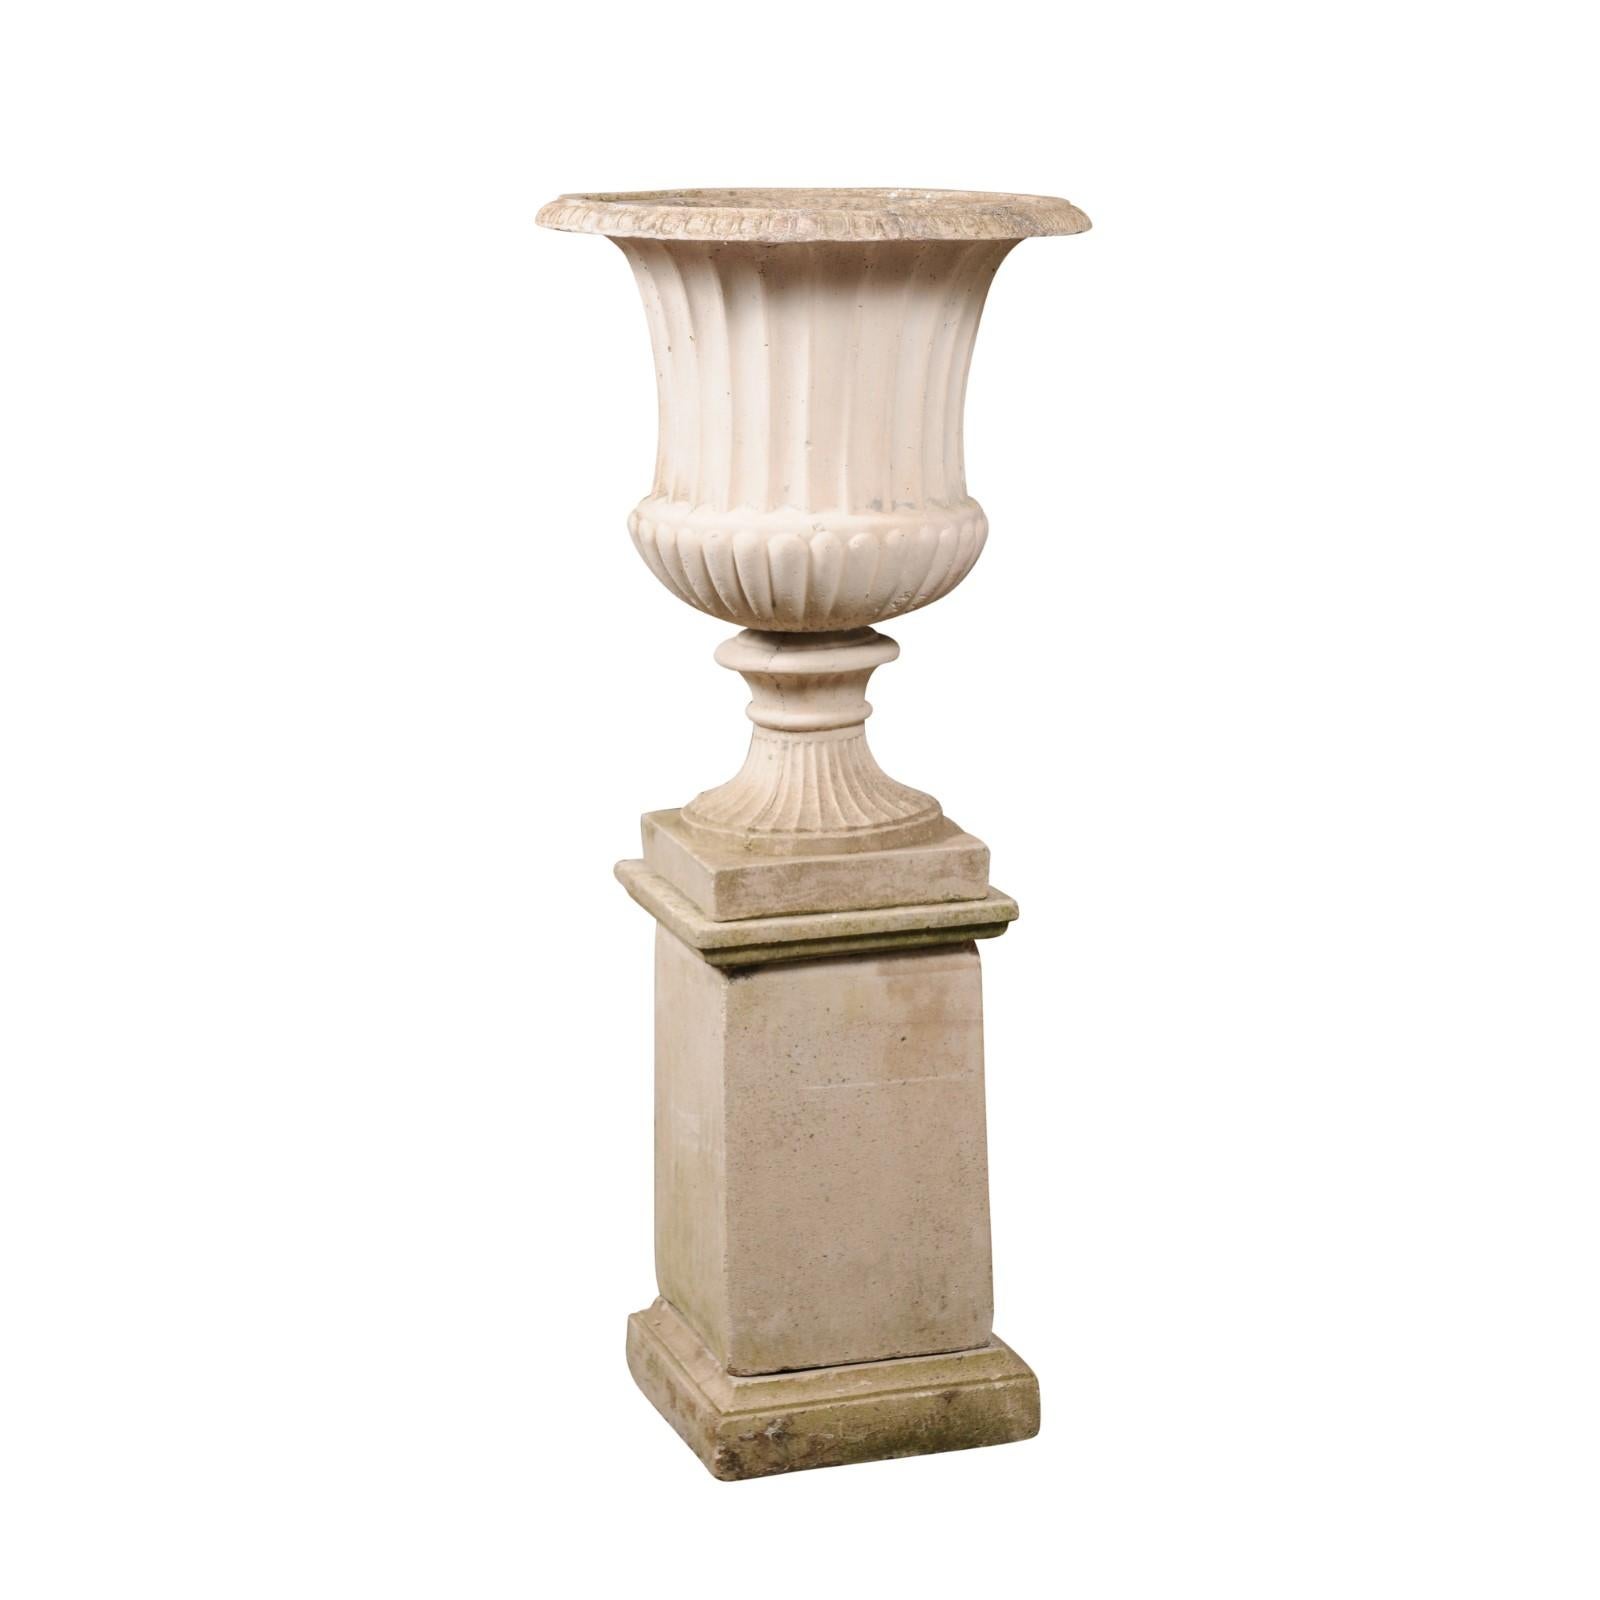 An Italian turn of the century campania urn from the early 20th century, with gadroon motifs, flaring shape and tall pedestal. Made of reconstituted stone in the early years of the 20th century, this Italian Campania urn captures our attention with